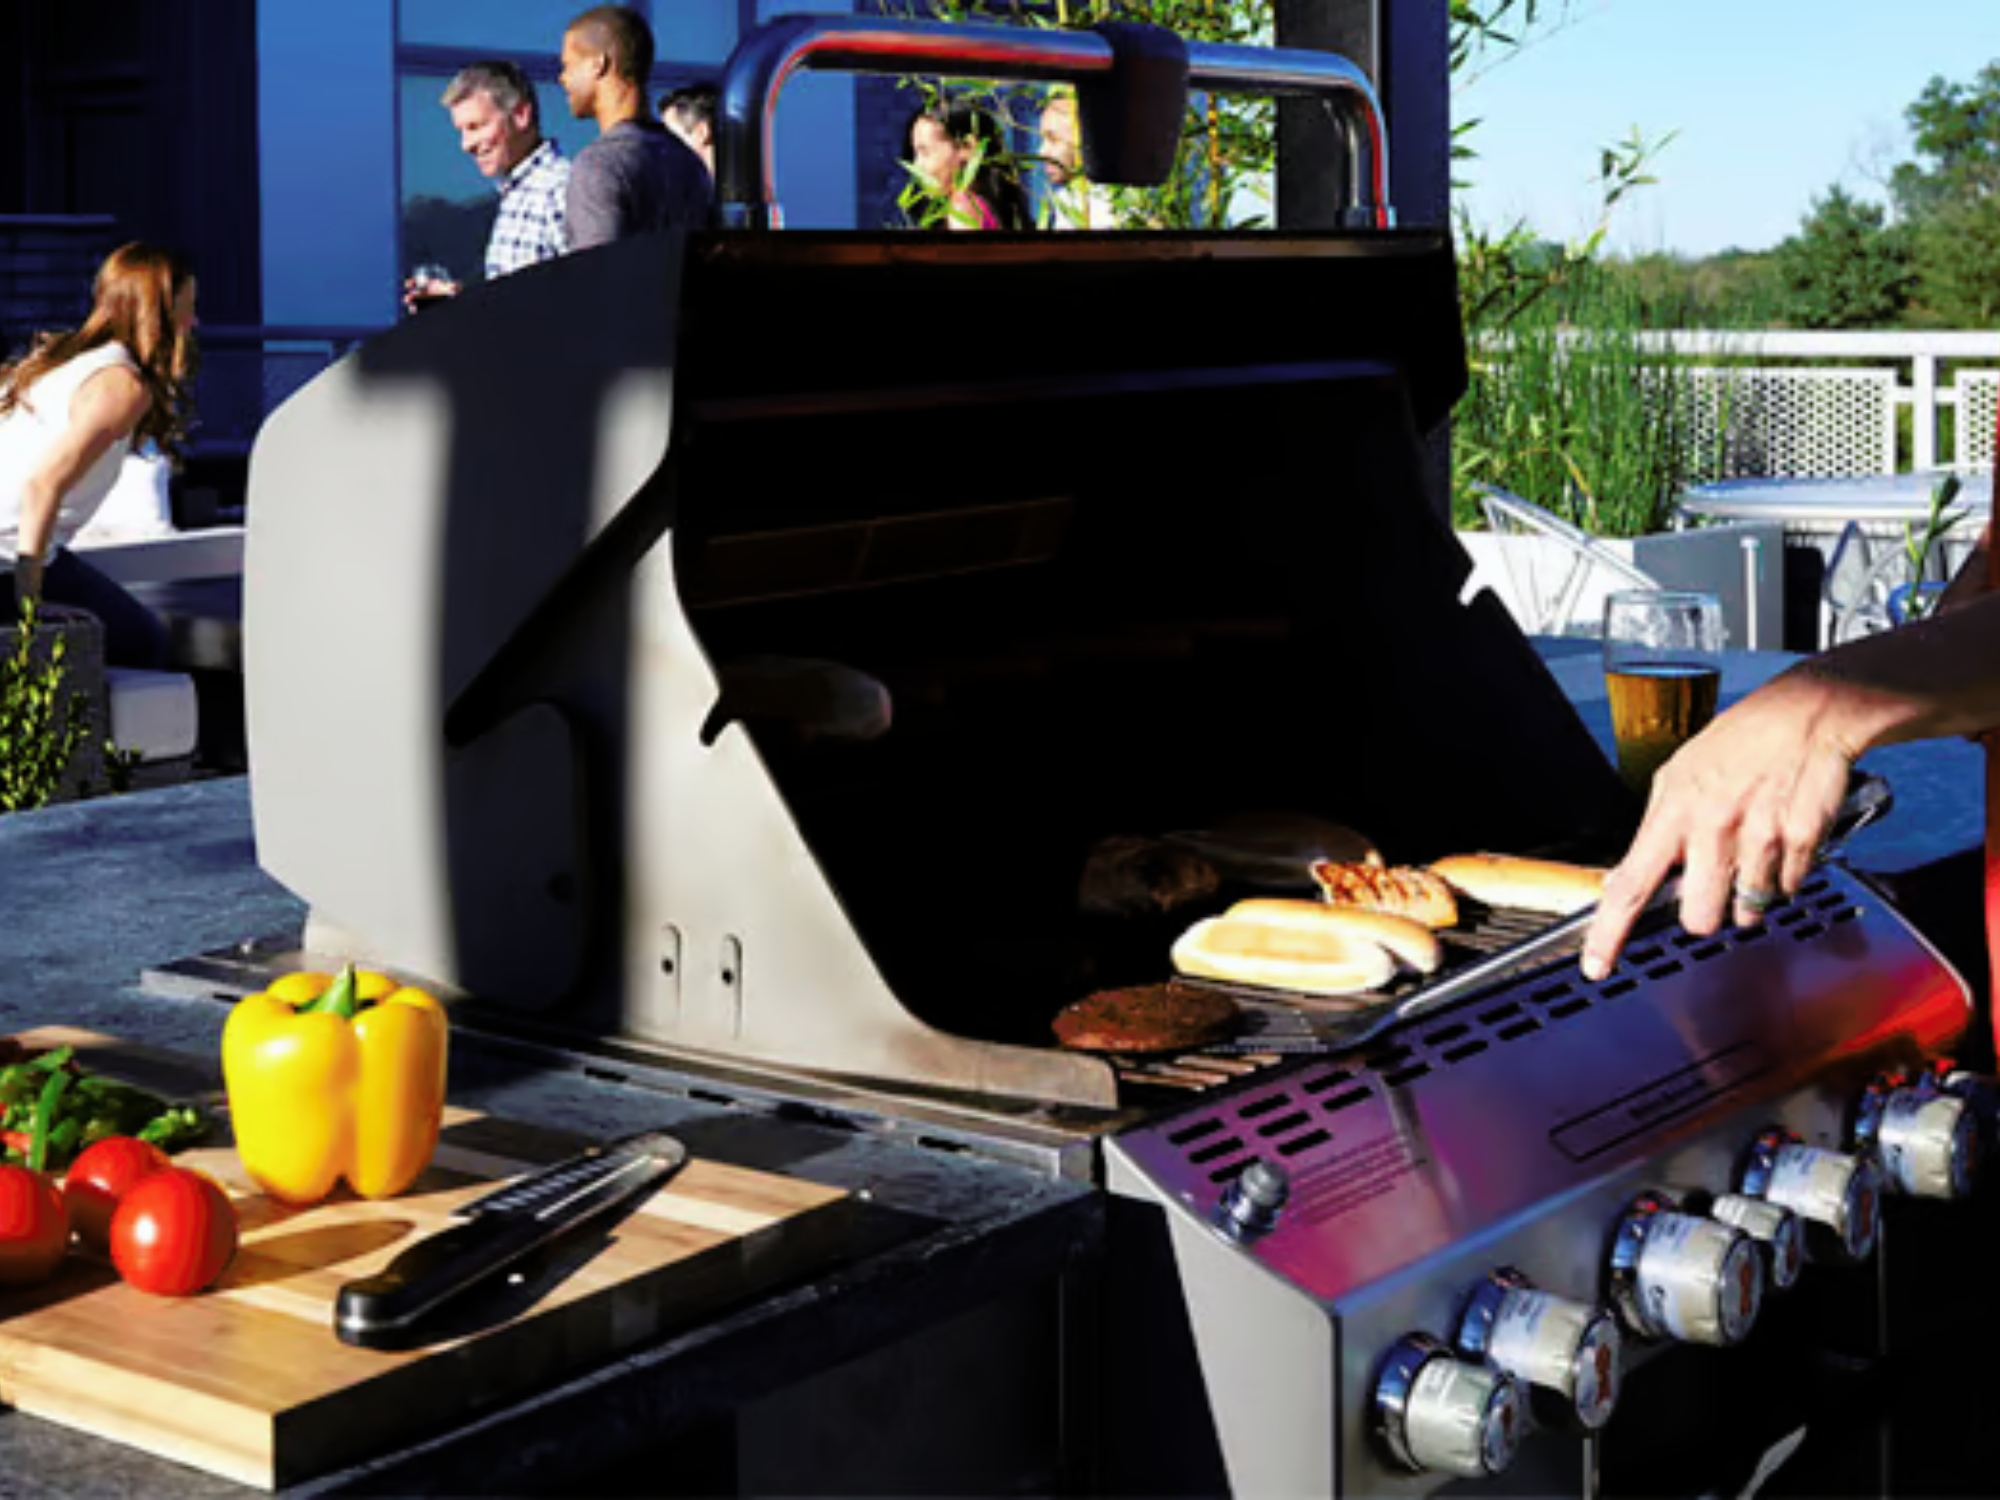 WE'RE ON FIRE! PHILLYMAG.COM CHAMPIONS OUR GRILLING AMENITIES!